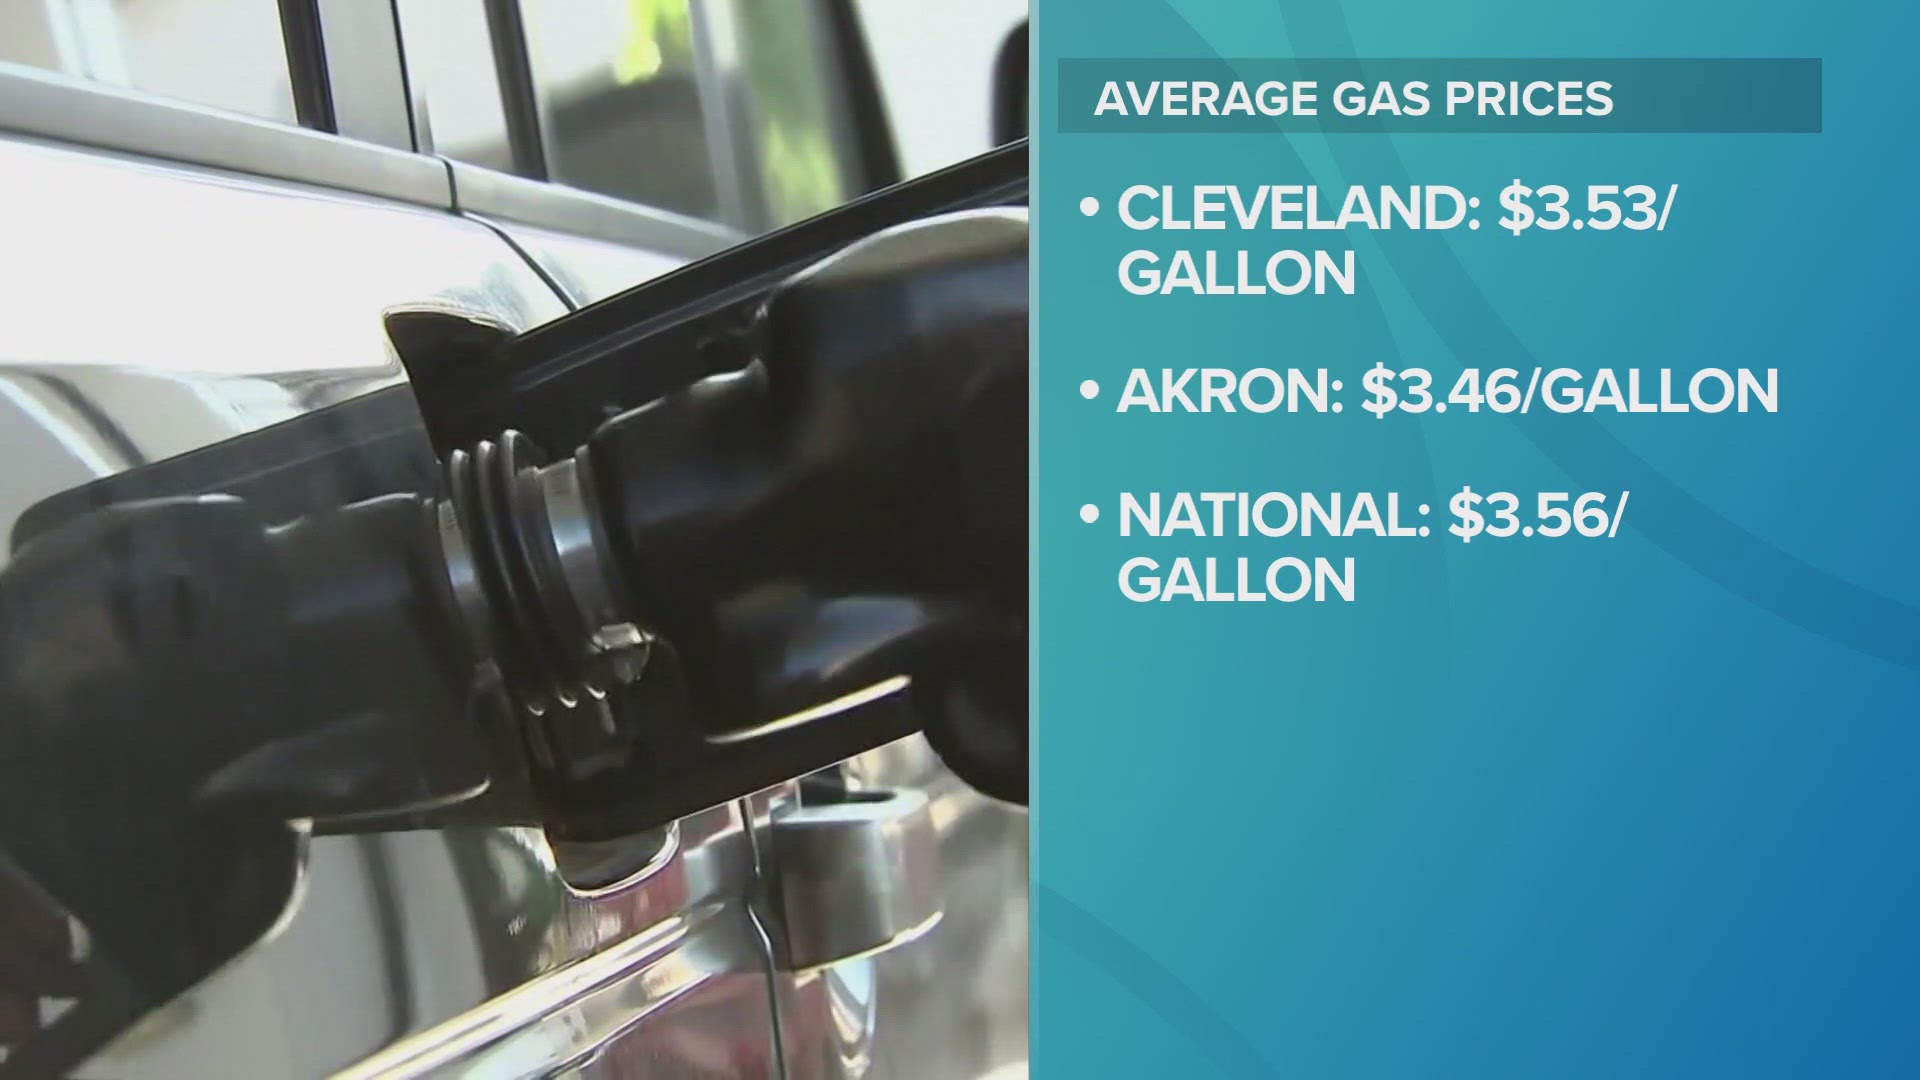 The average price in Akron is now listed at $3.46 per gallon, while Cleveland's is slightly higher at $3.53.